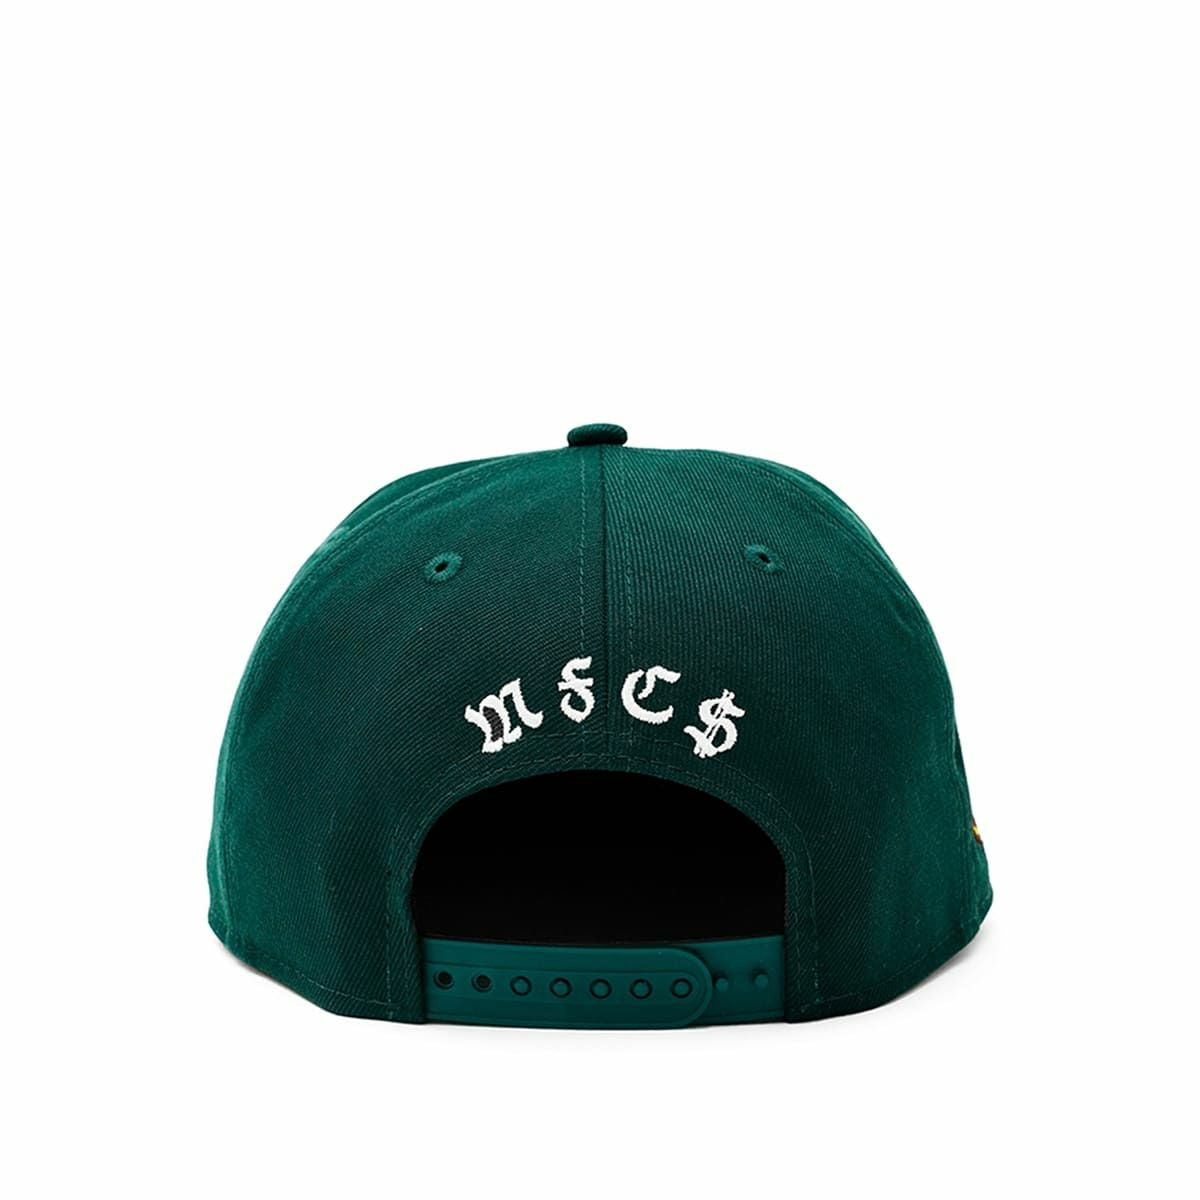 NEW ERA × MFC STORE SNAPBACK M＄ DICE FRAME 9FIFTY【13357972】